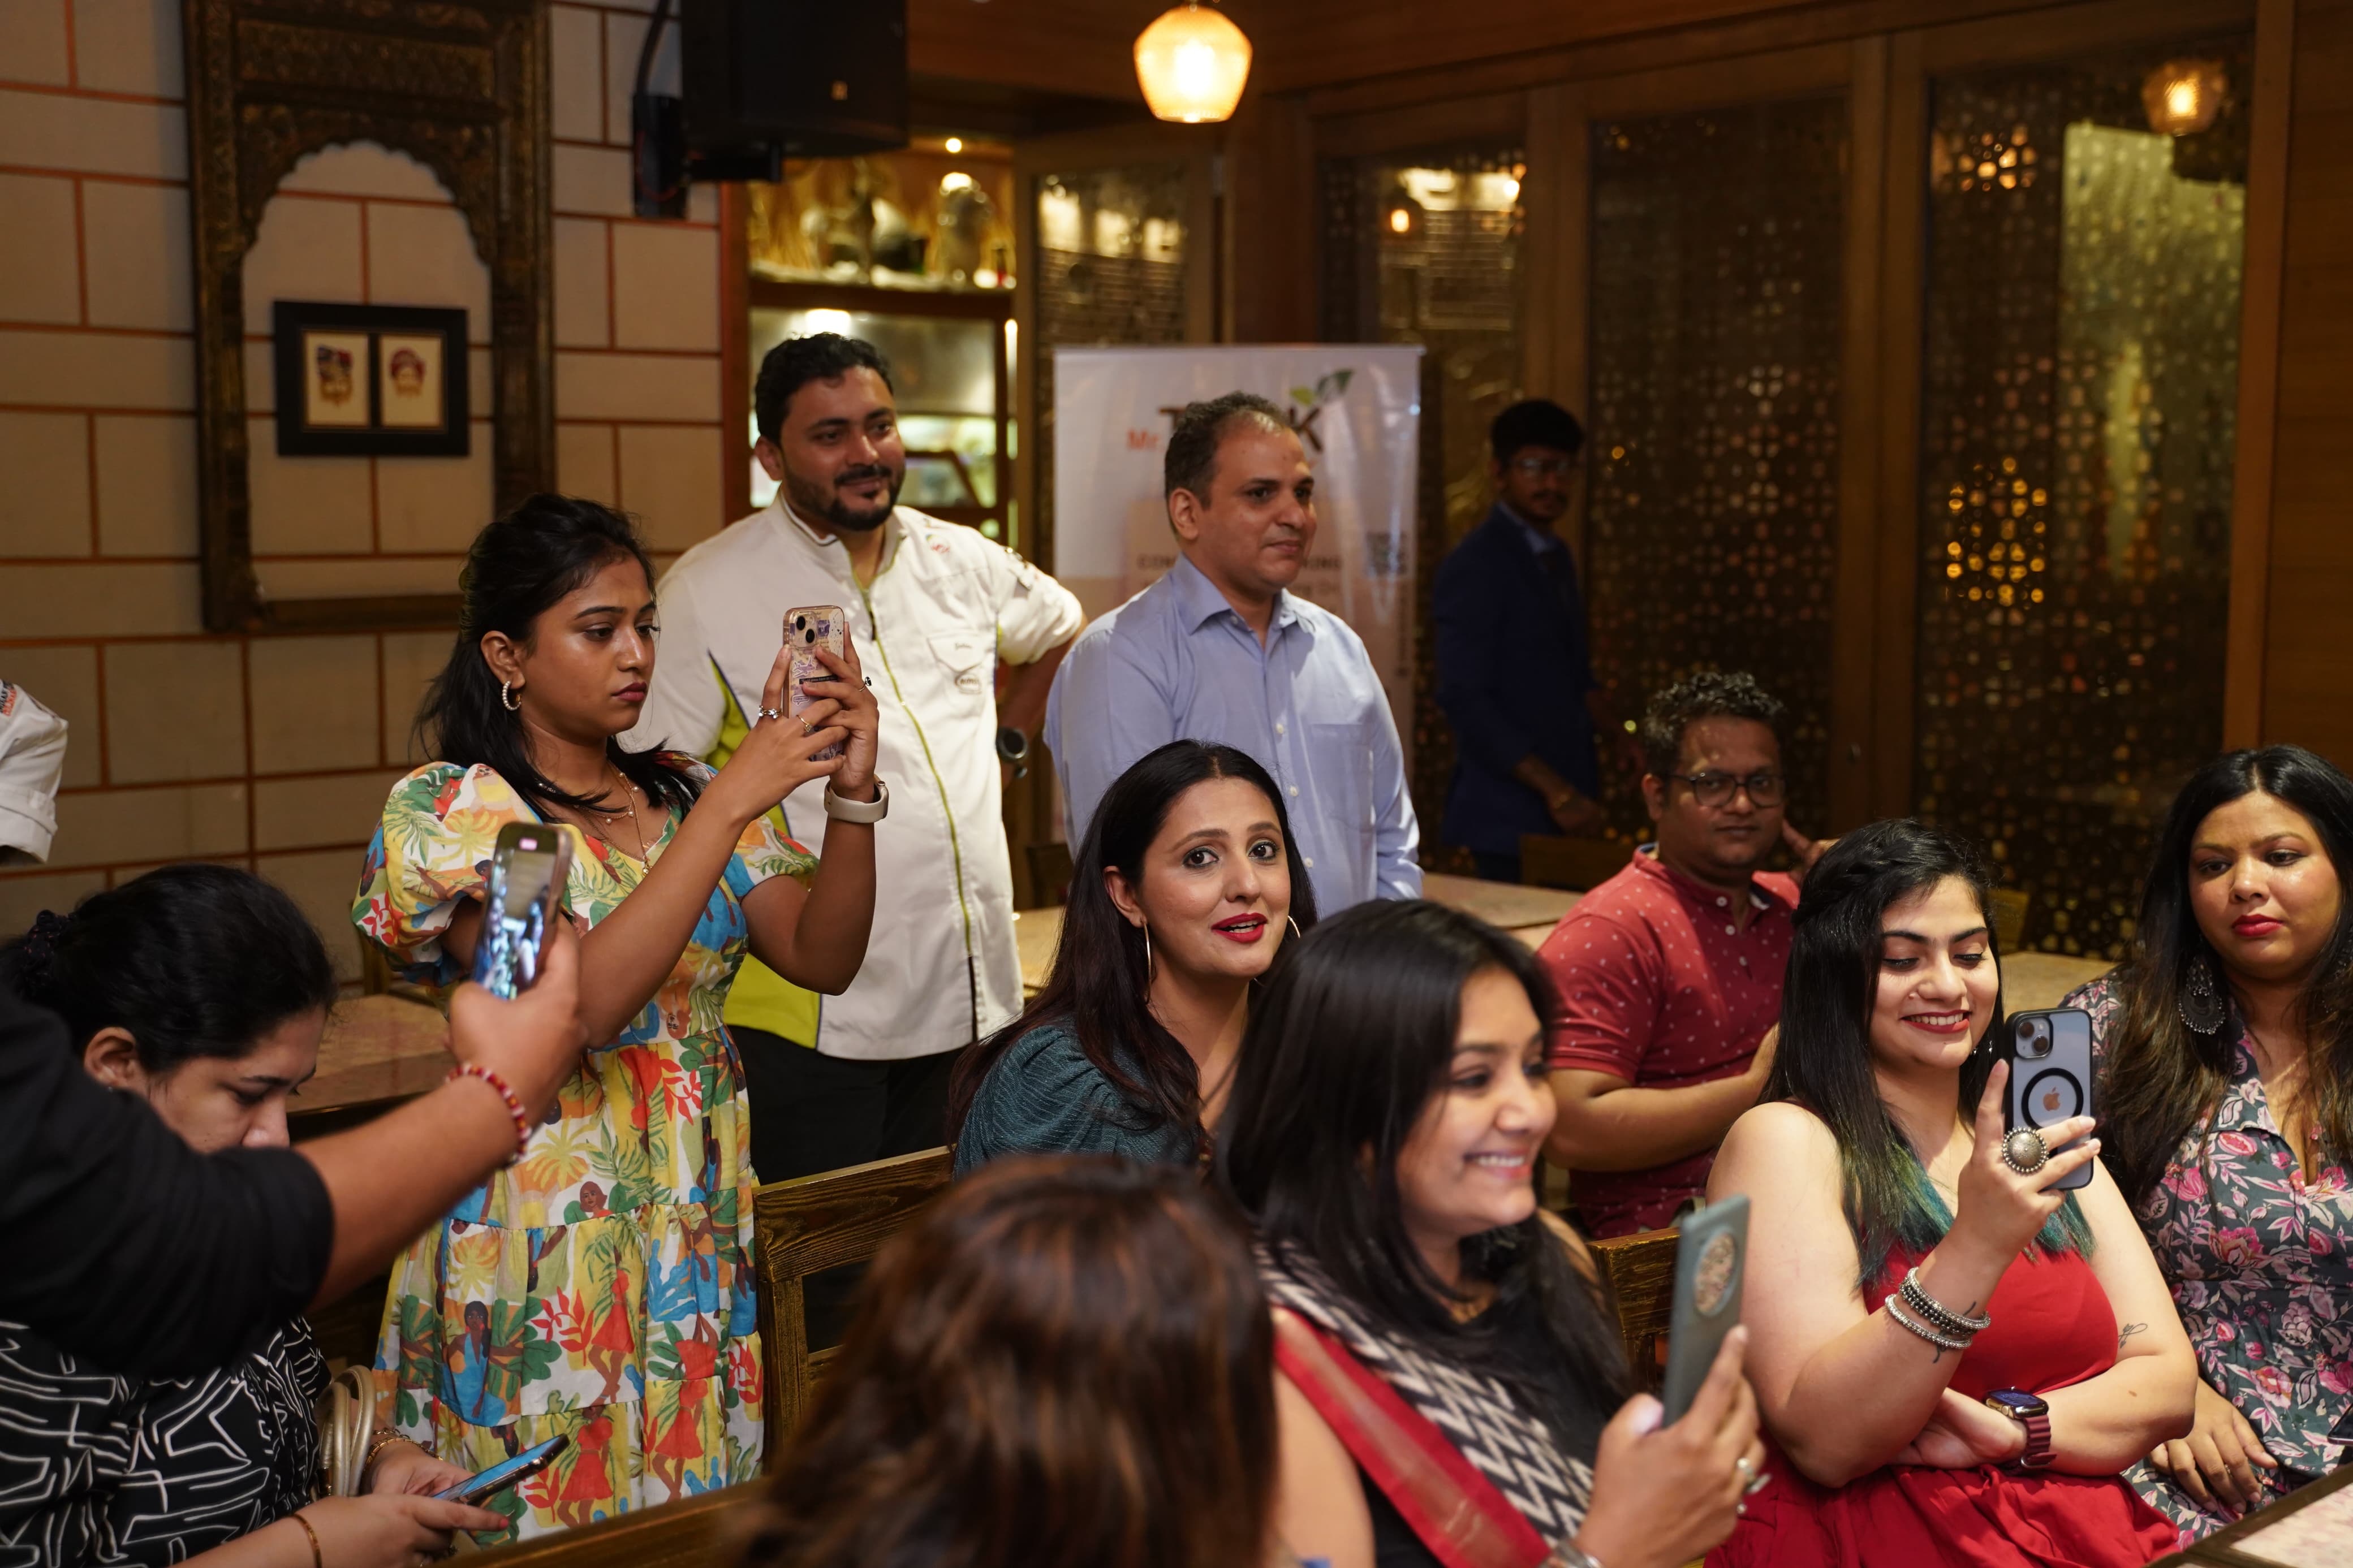 "Pre-Plated Feast for Renowned Influencers: Chef Ishijyot Surri, Chef Rohit Gujral, and the Distinctive Flavors of Mr Truk Sauces Create A Magical Experience!"